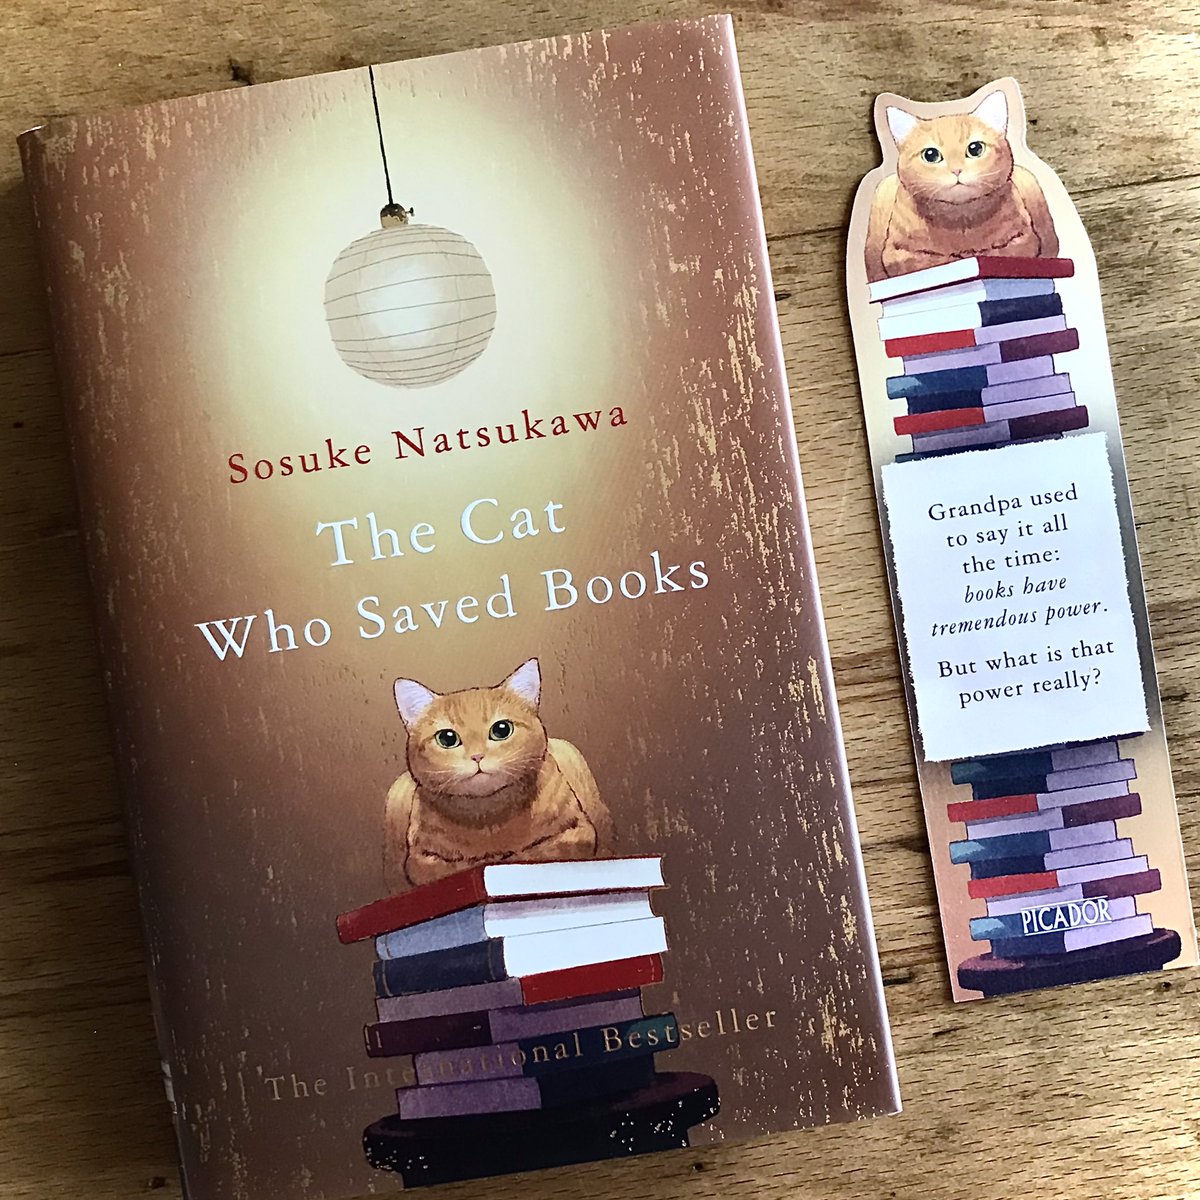 How good does #TheCatWhoSavedBooks by #SosukeNatsukawa look? 
Absolutely flipping gorgeous is the right answer!
A tale from Japan involving books, cats & 2nd hand bookshops - what’s not to 🧡 about the inside too.
Tr: Louise Heal Kawai
Thank you Alice Dewing for my copy.
#Gifted